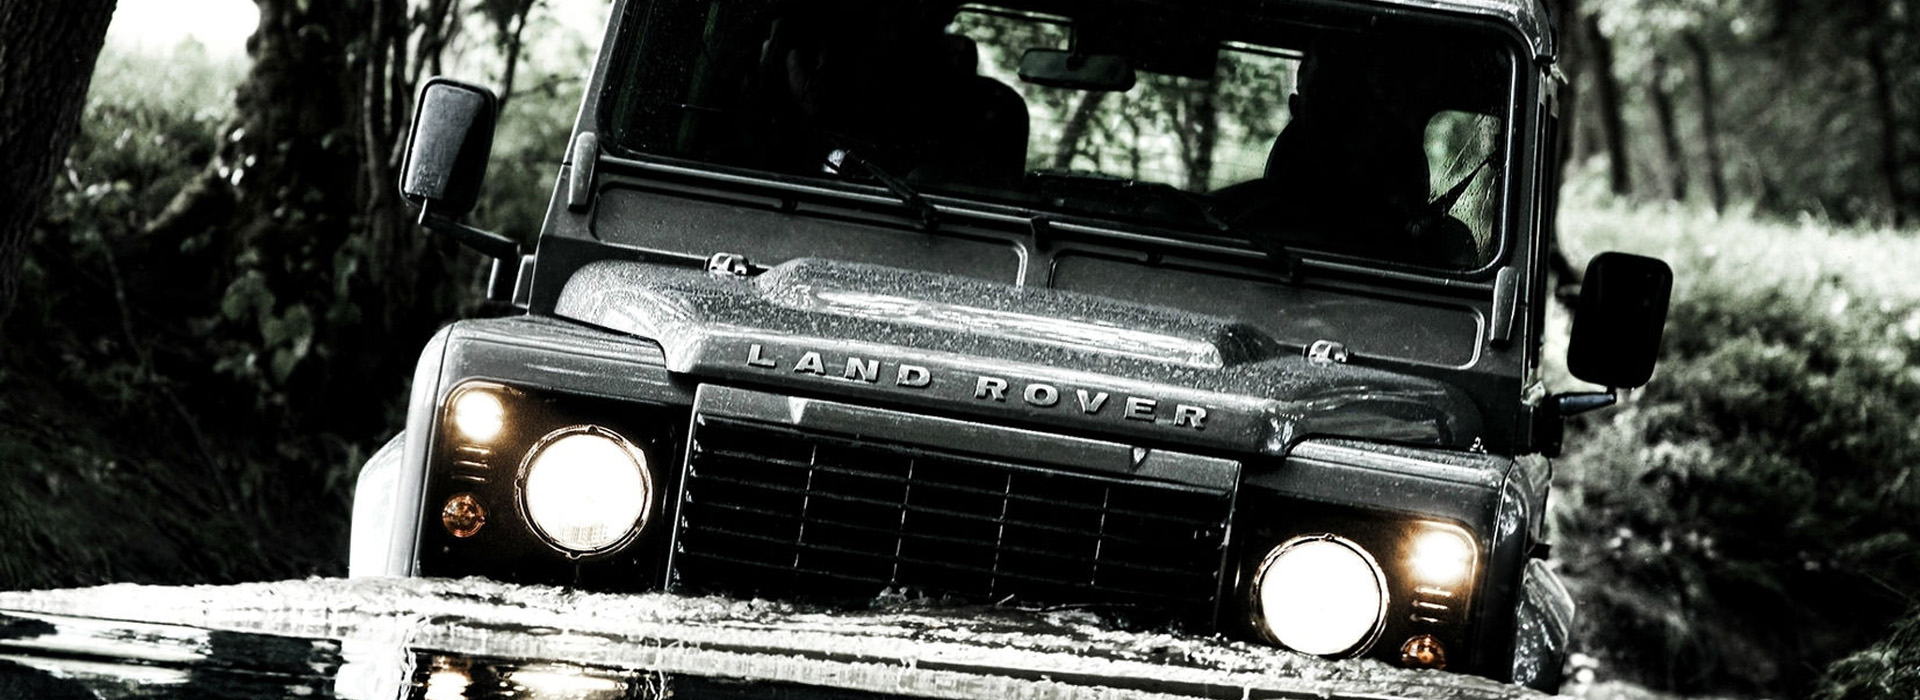 LAND ROVER OWNERS CLUB